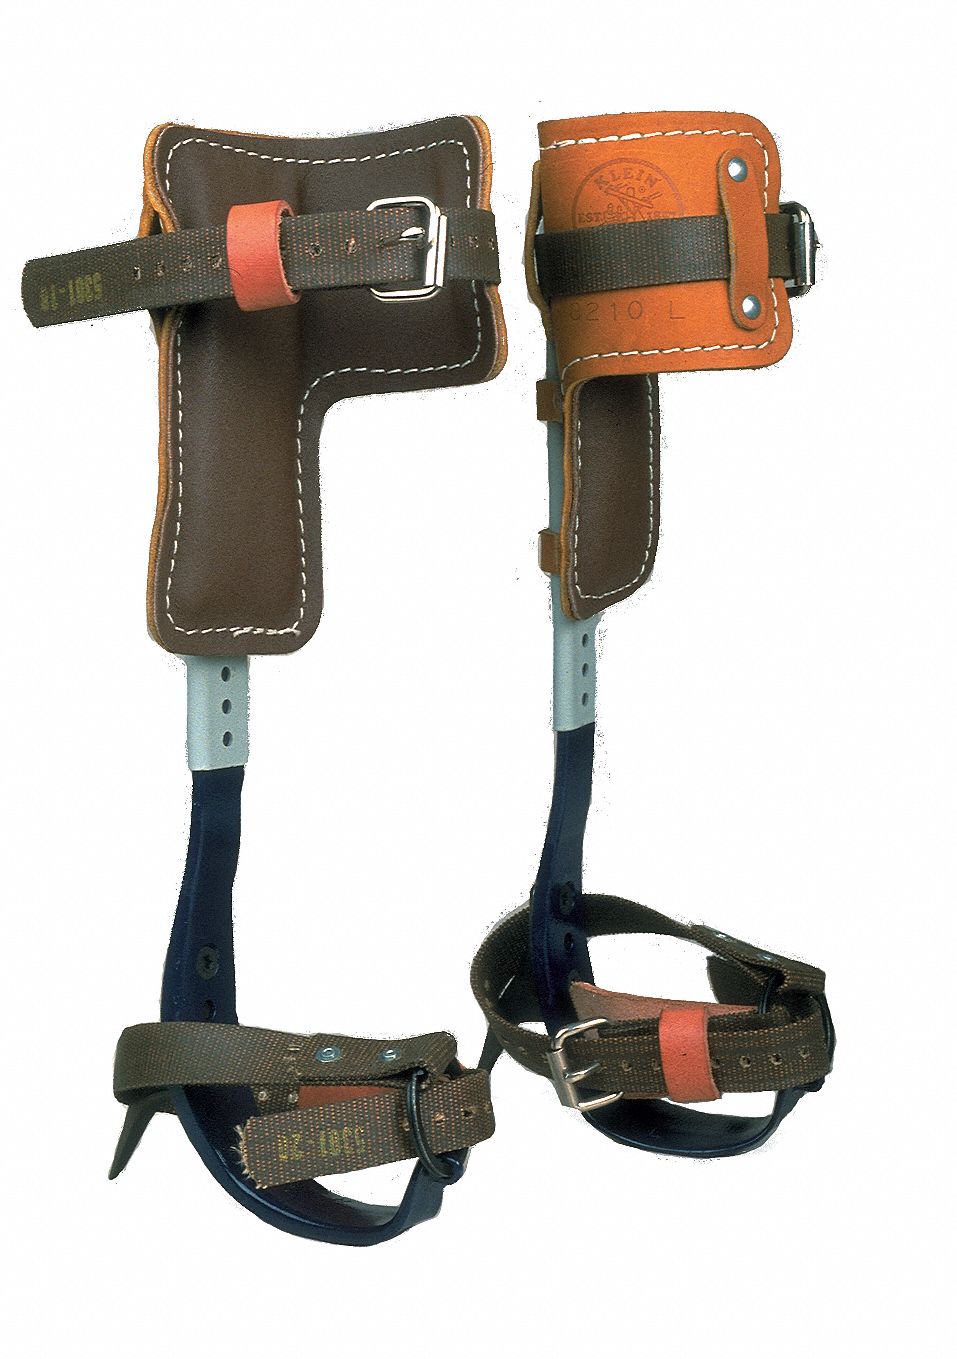 Tree Pole Climbers and Accessories